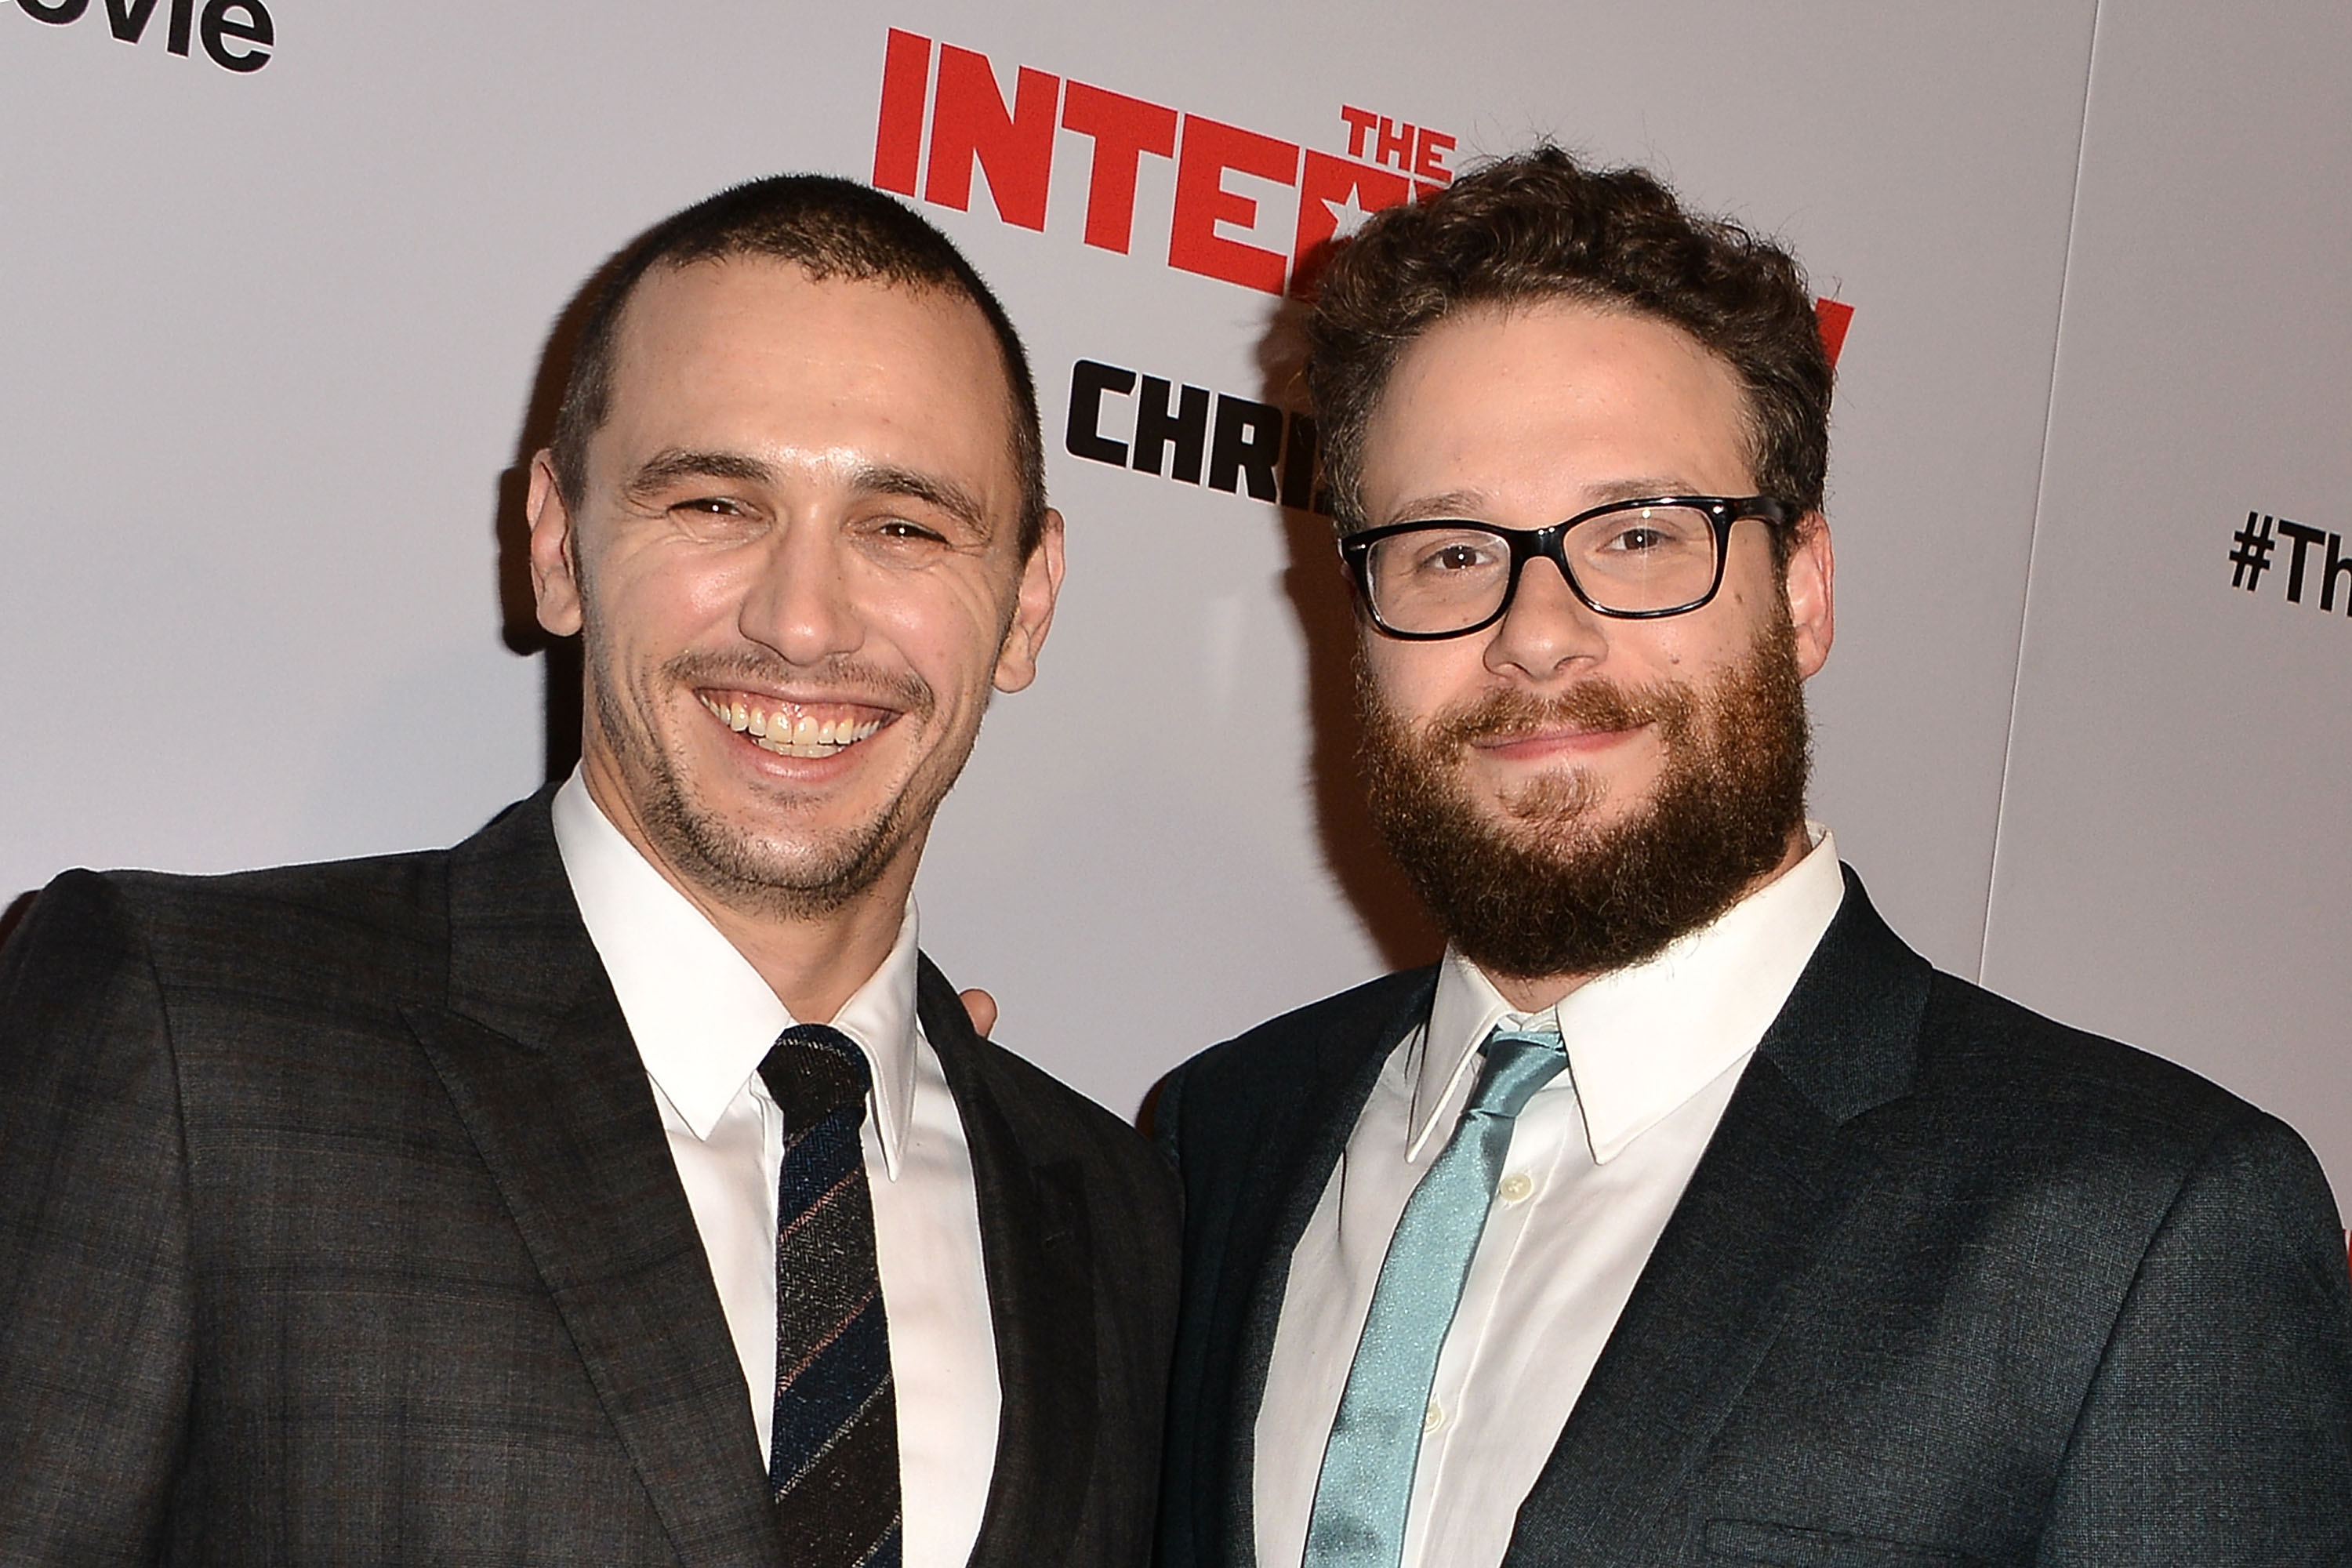 Actors James Franco and Seth Rogen at the Los Angeles premiere of <i>The Interview</i> on Dec. 11, 2014 (Araya Diaz—WireImage)